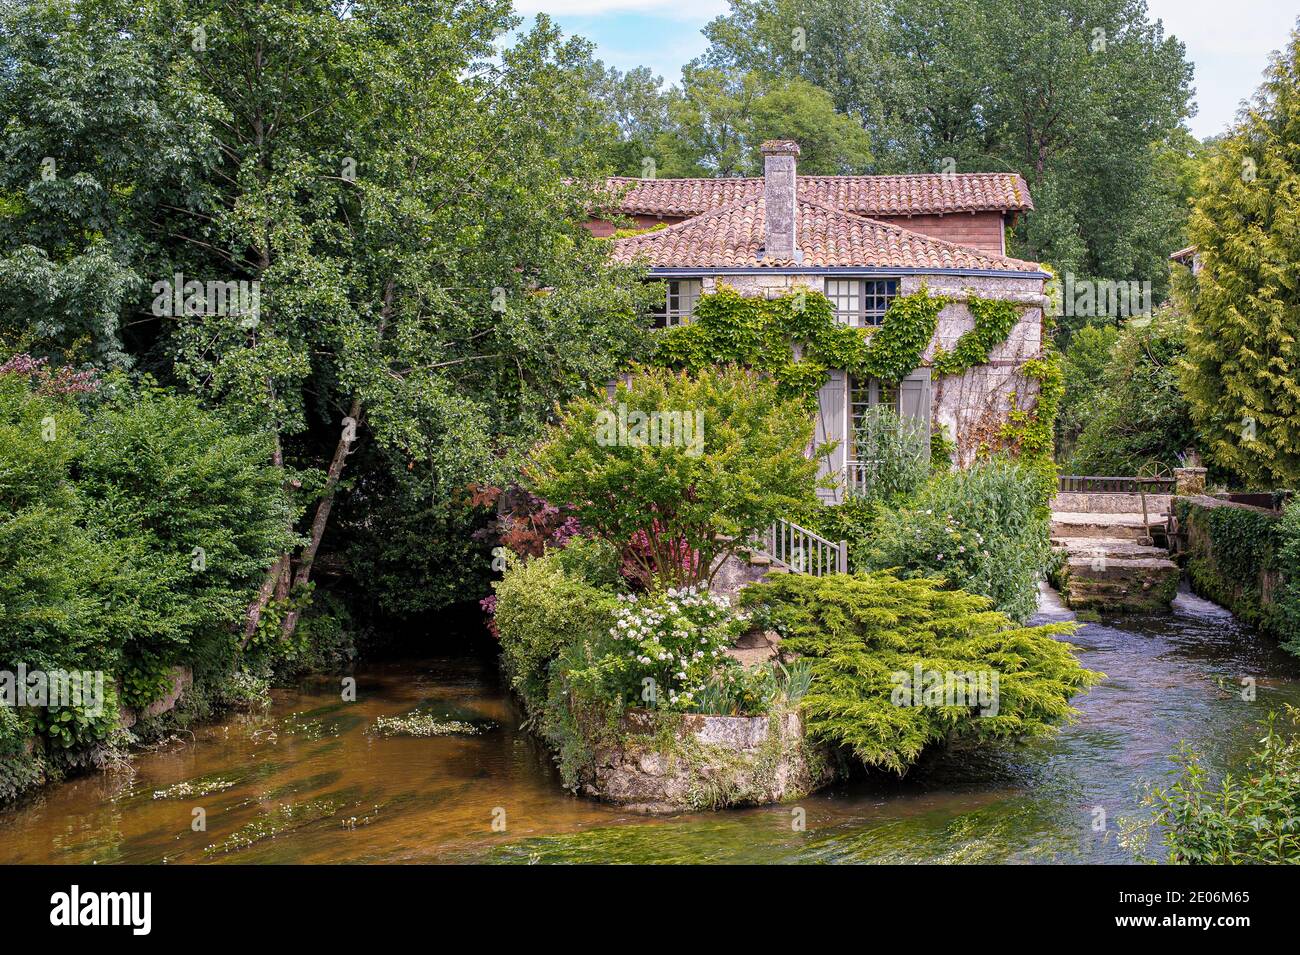 In France, in the village of Bourdeilles, a curious house was built in the middle of the river. It is reached by footbridges over the water. Stock Photo